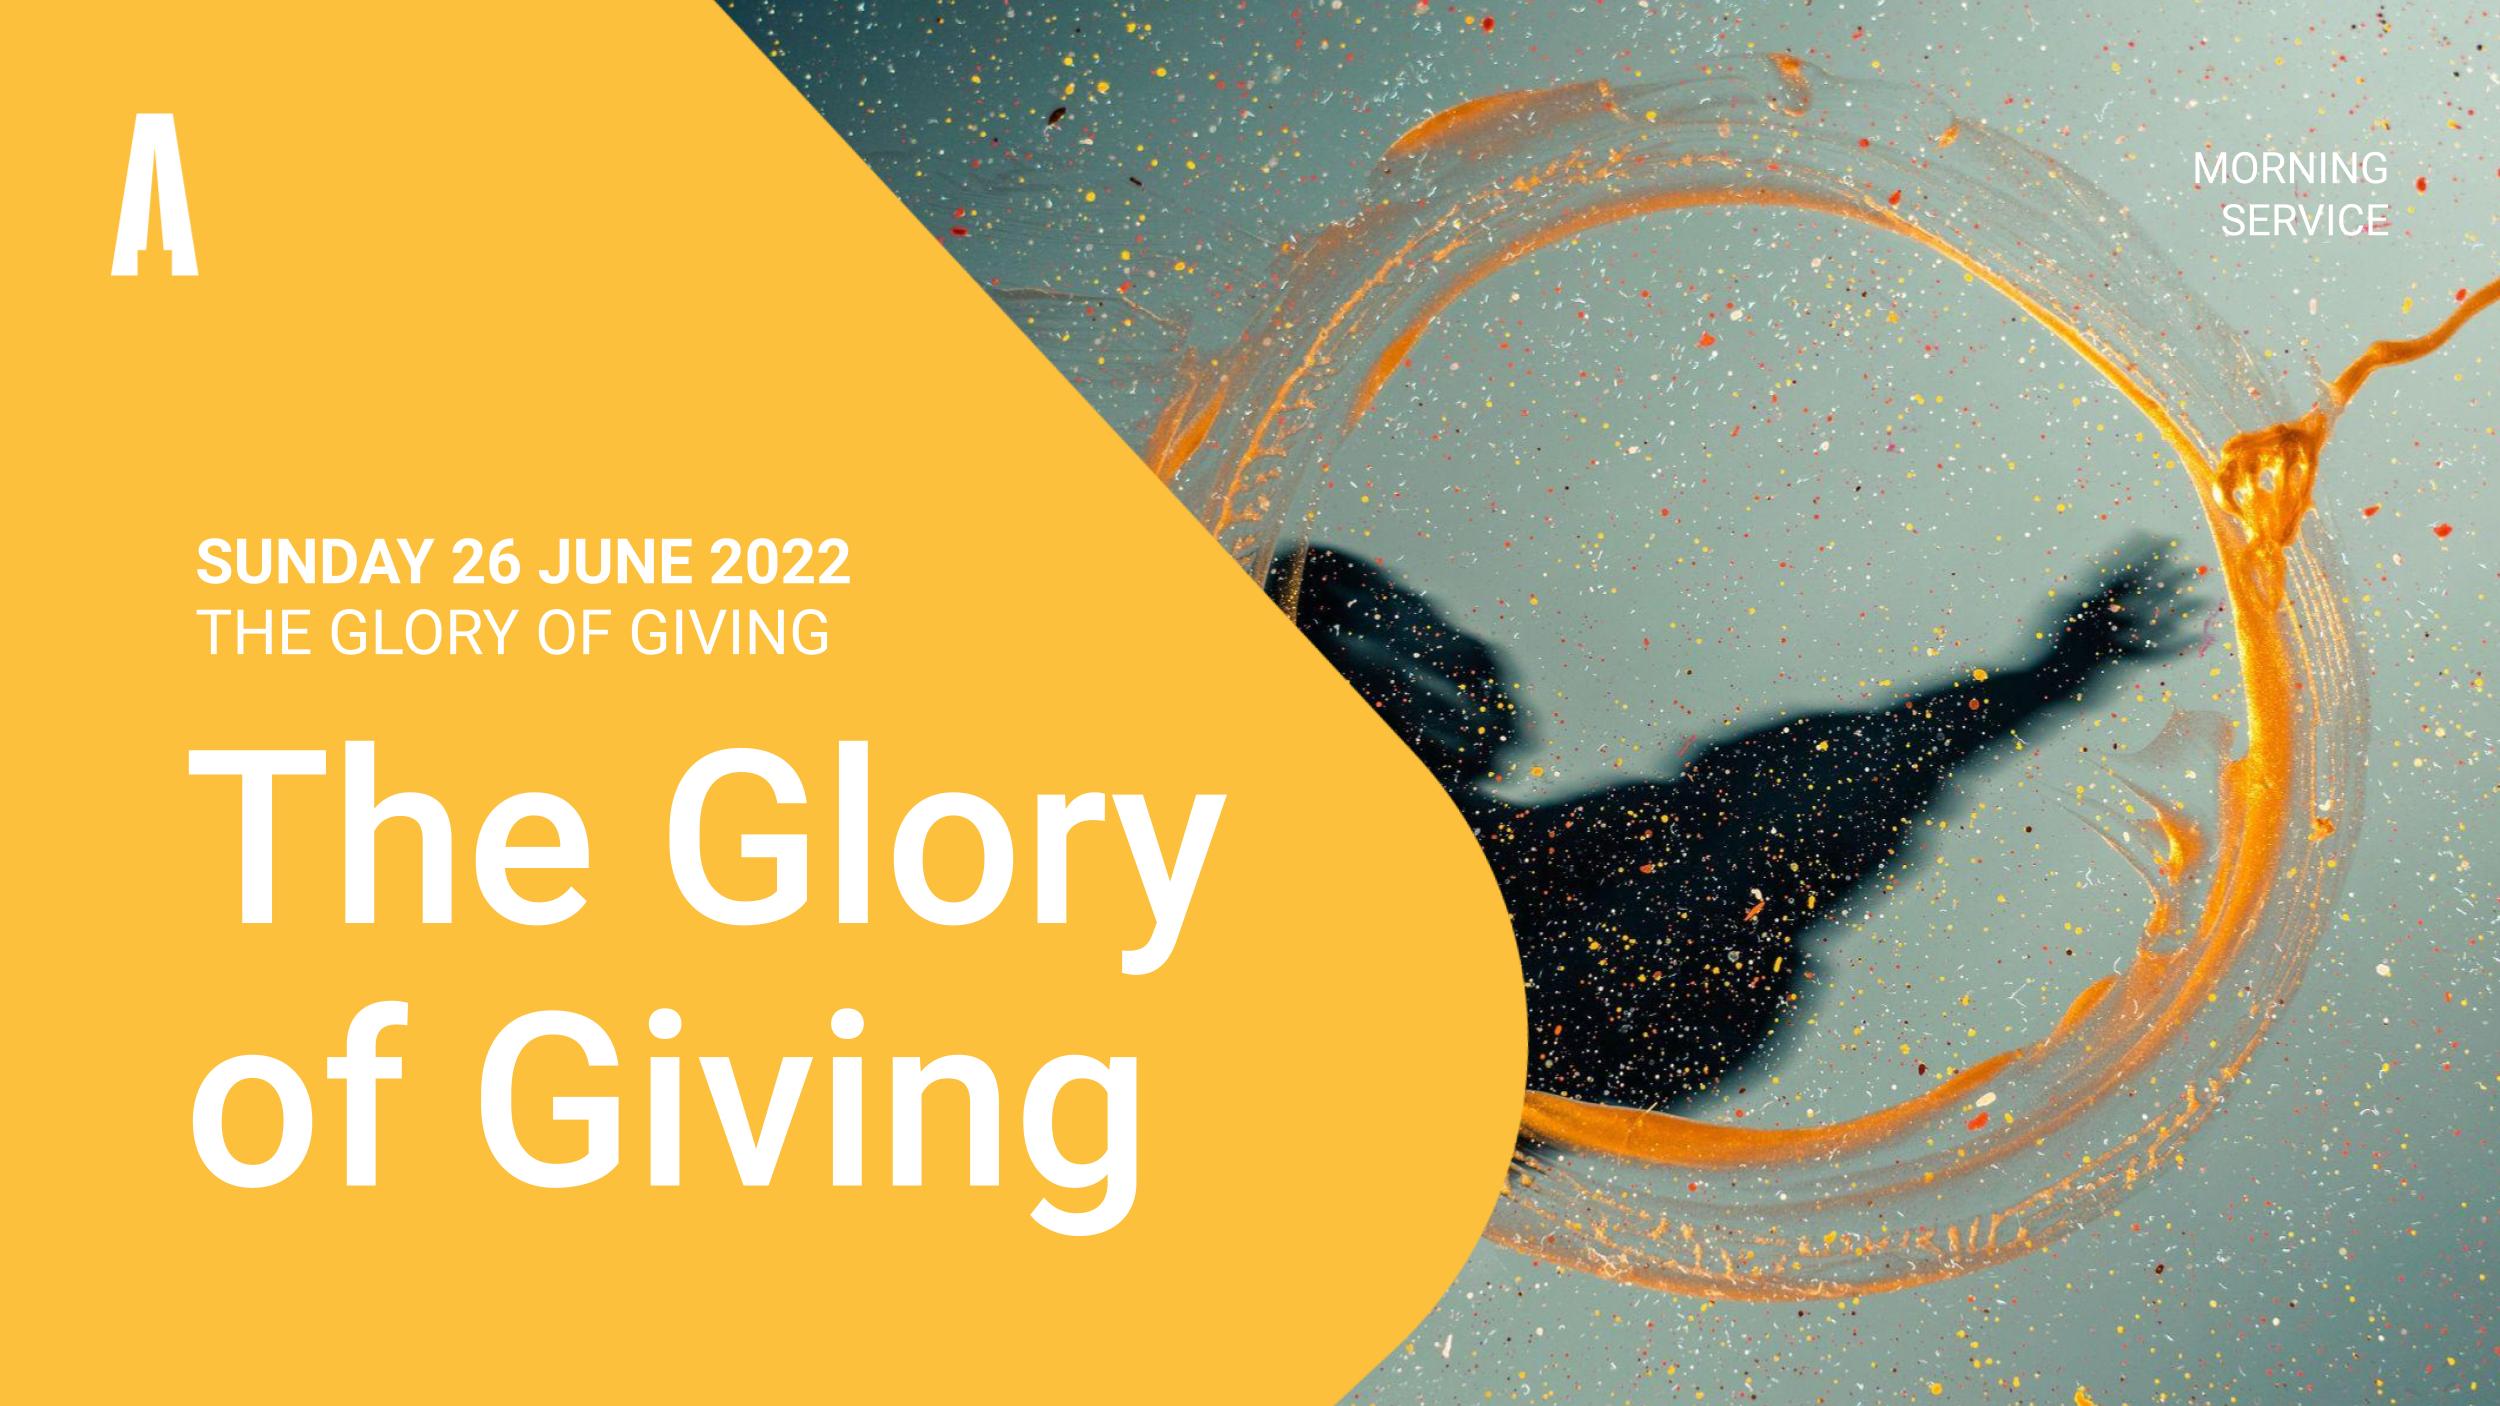 The Glory of Giving